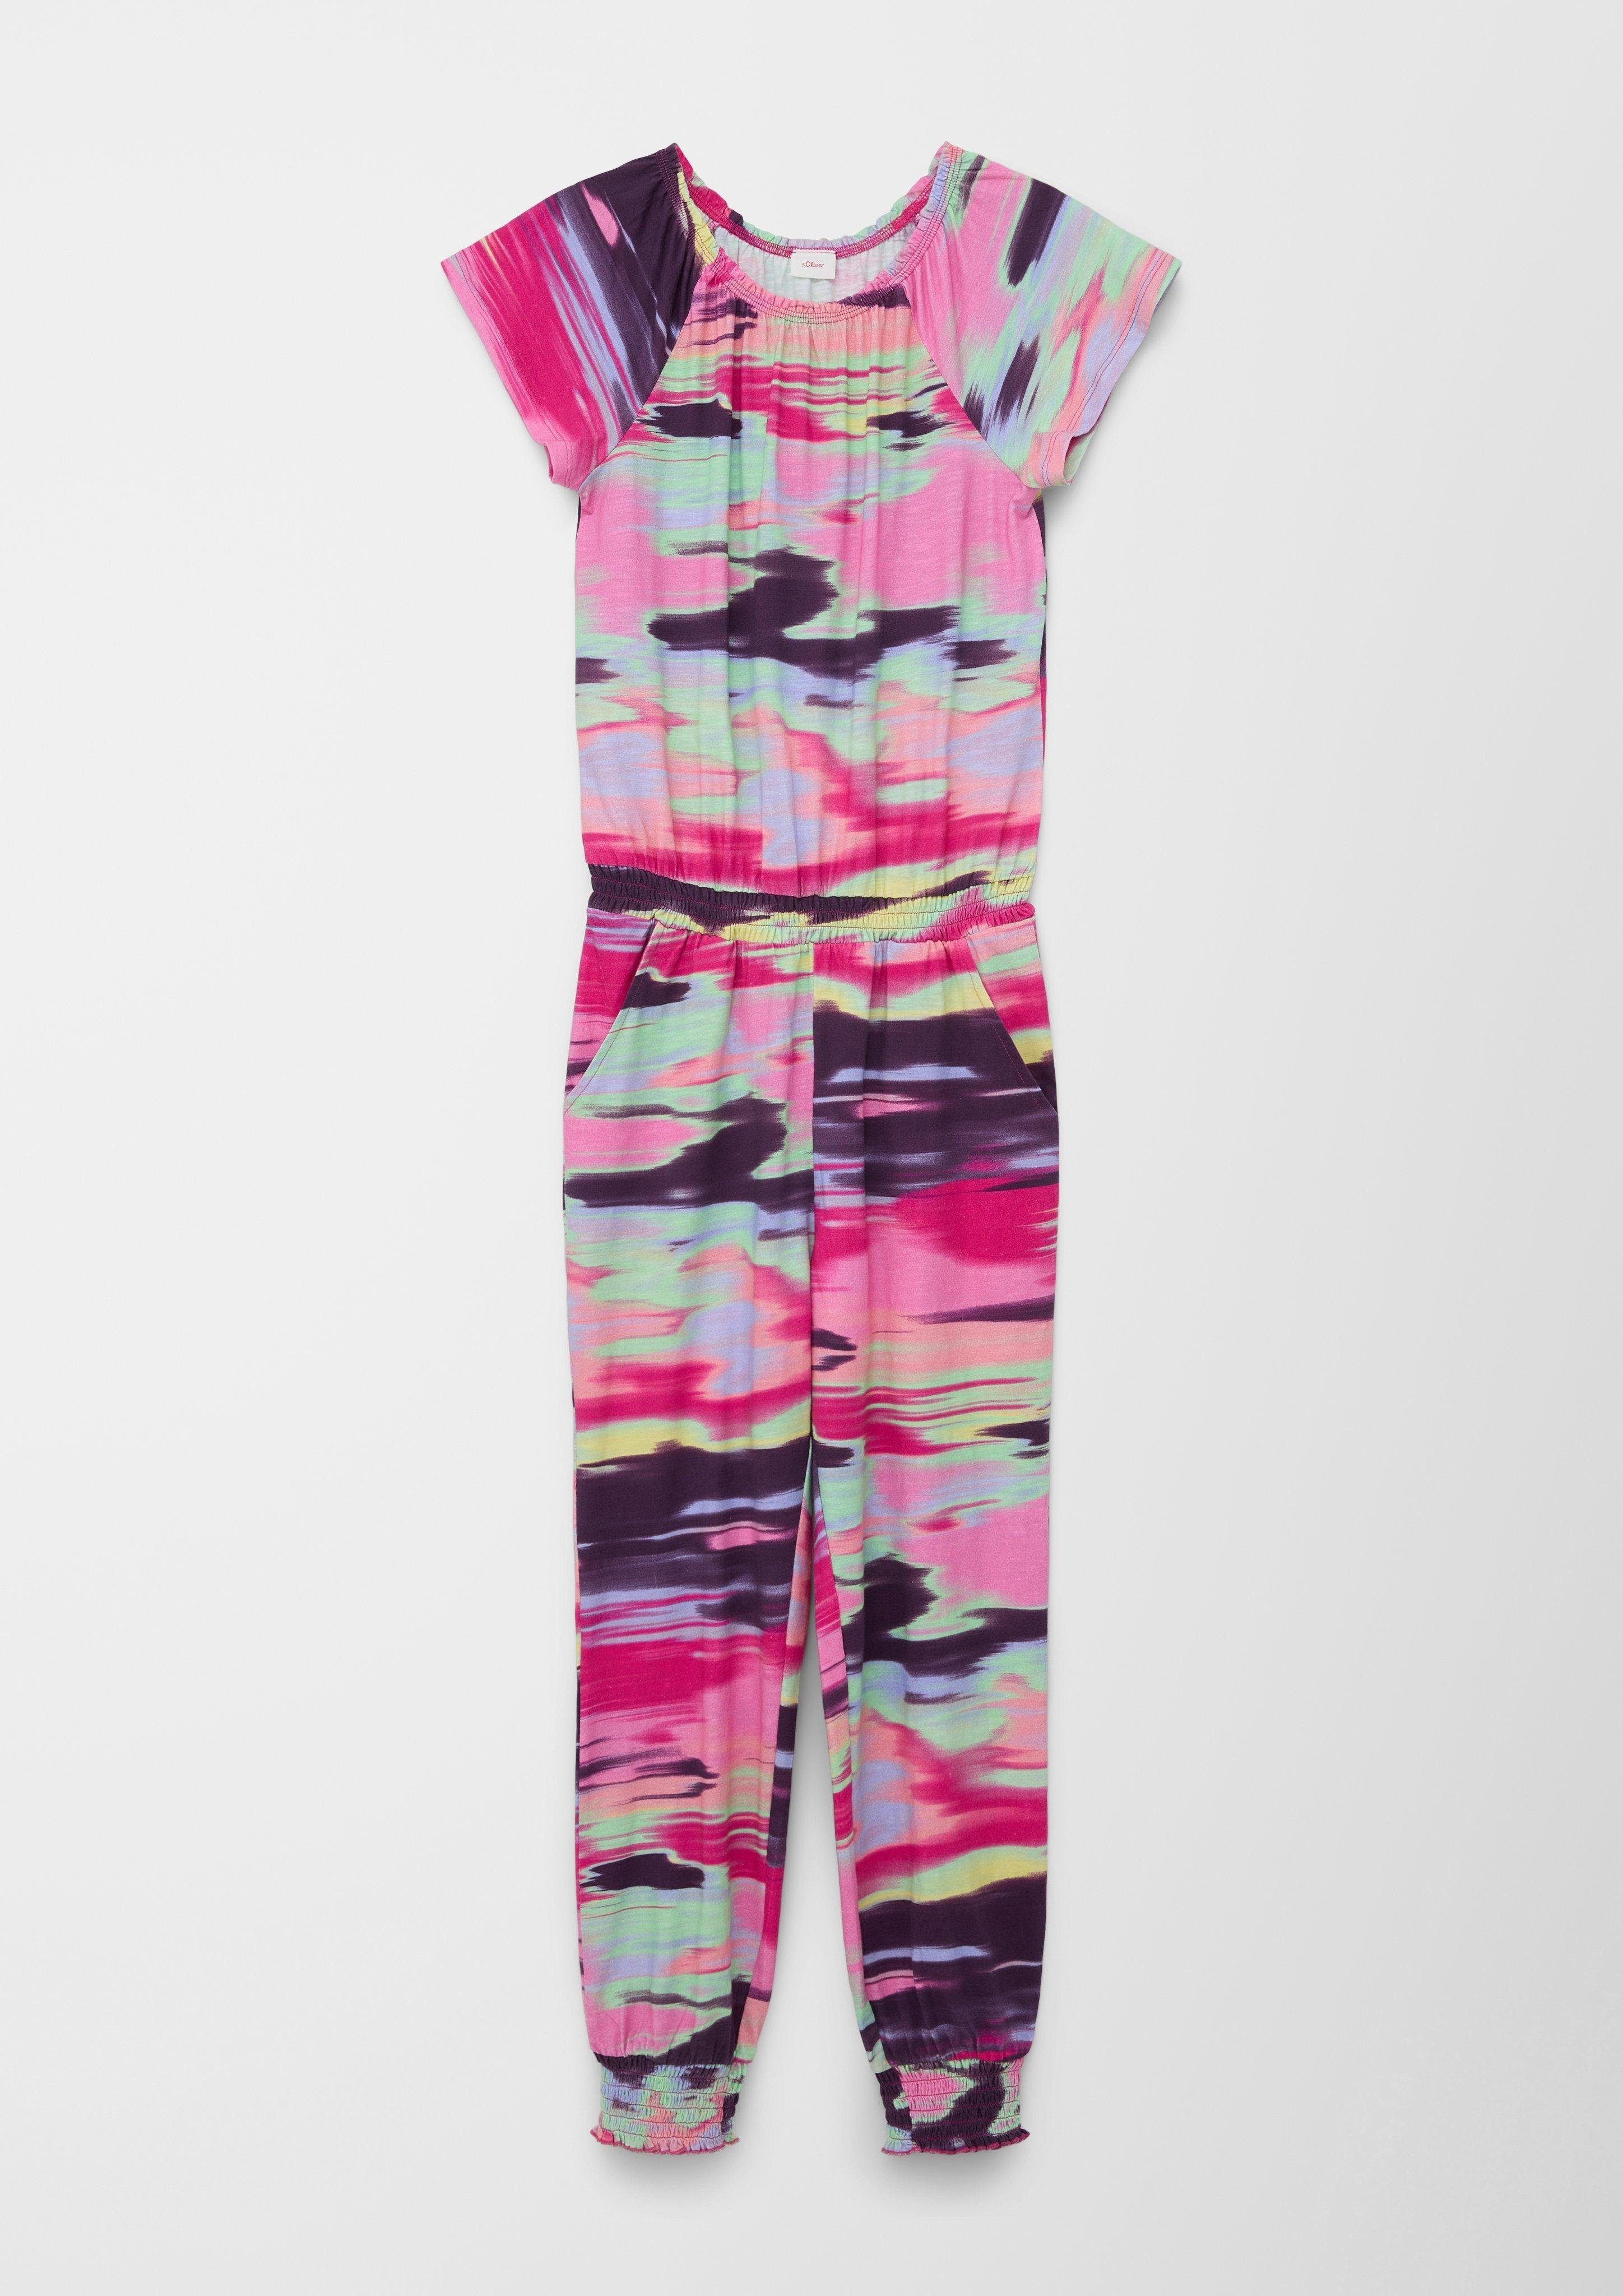 Smok-Detail Overall Print Overall abstraktem s.Oliver mit